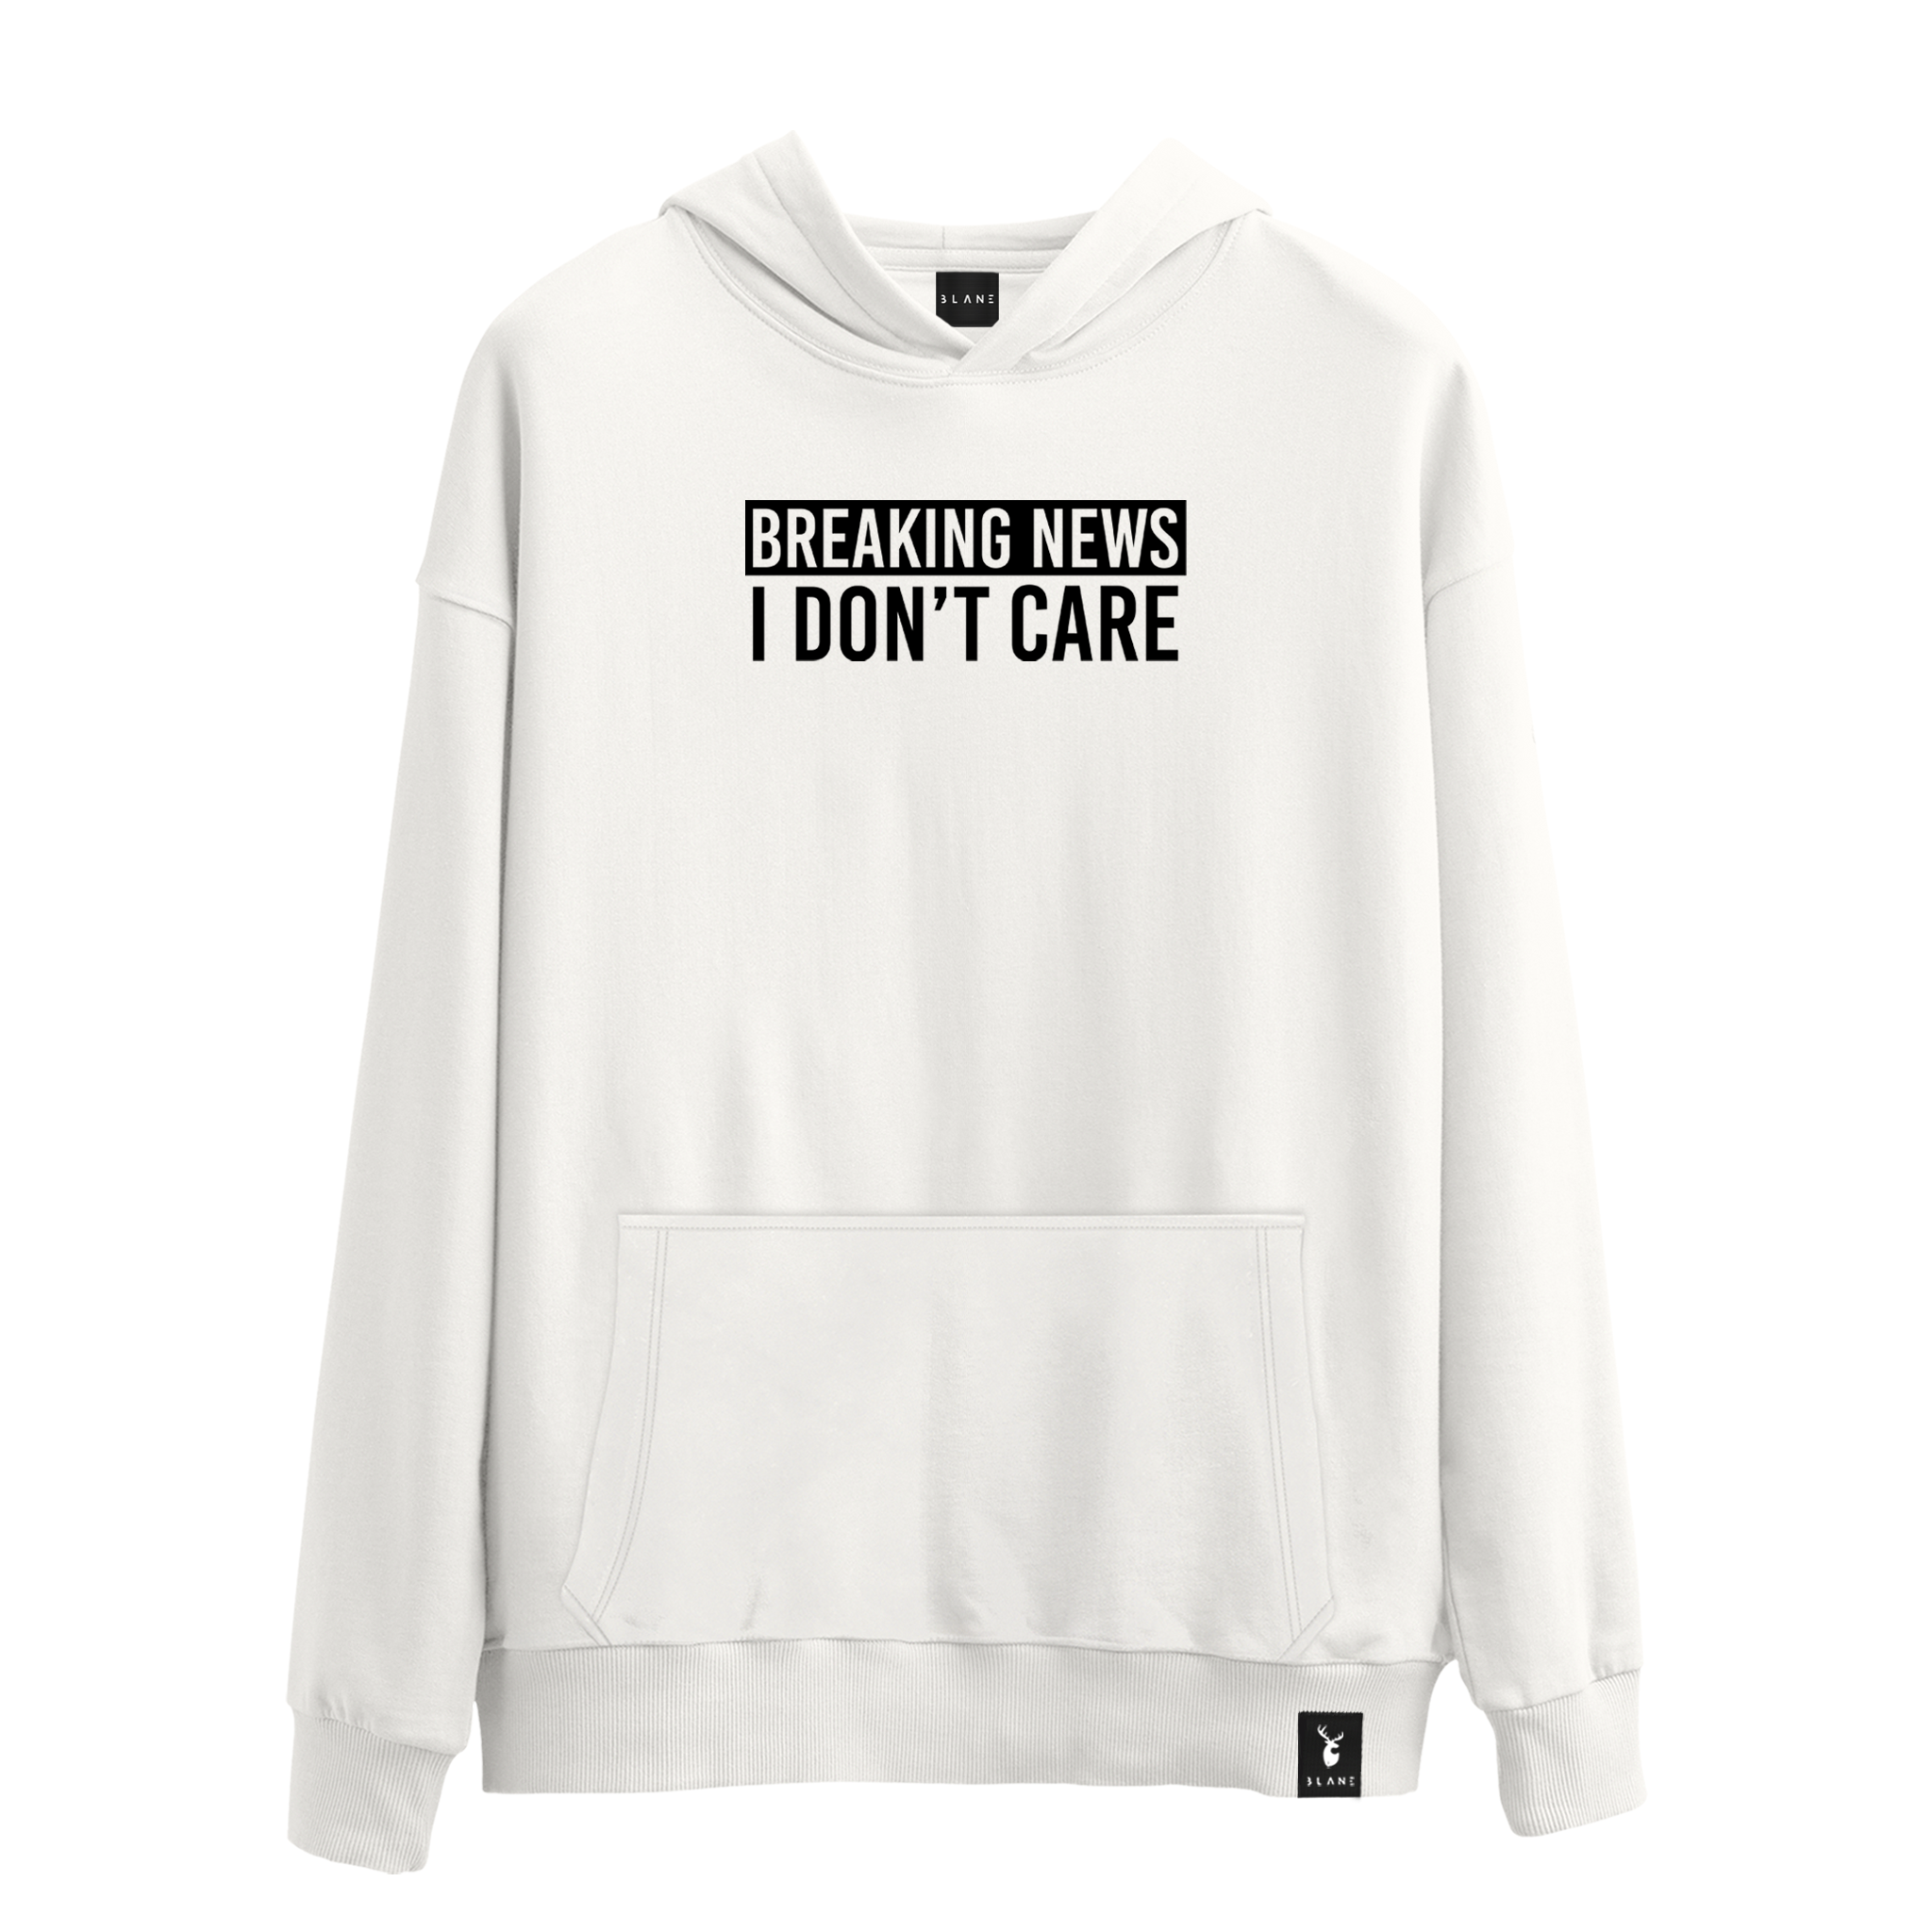 I DON'T CARE - Hoodie